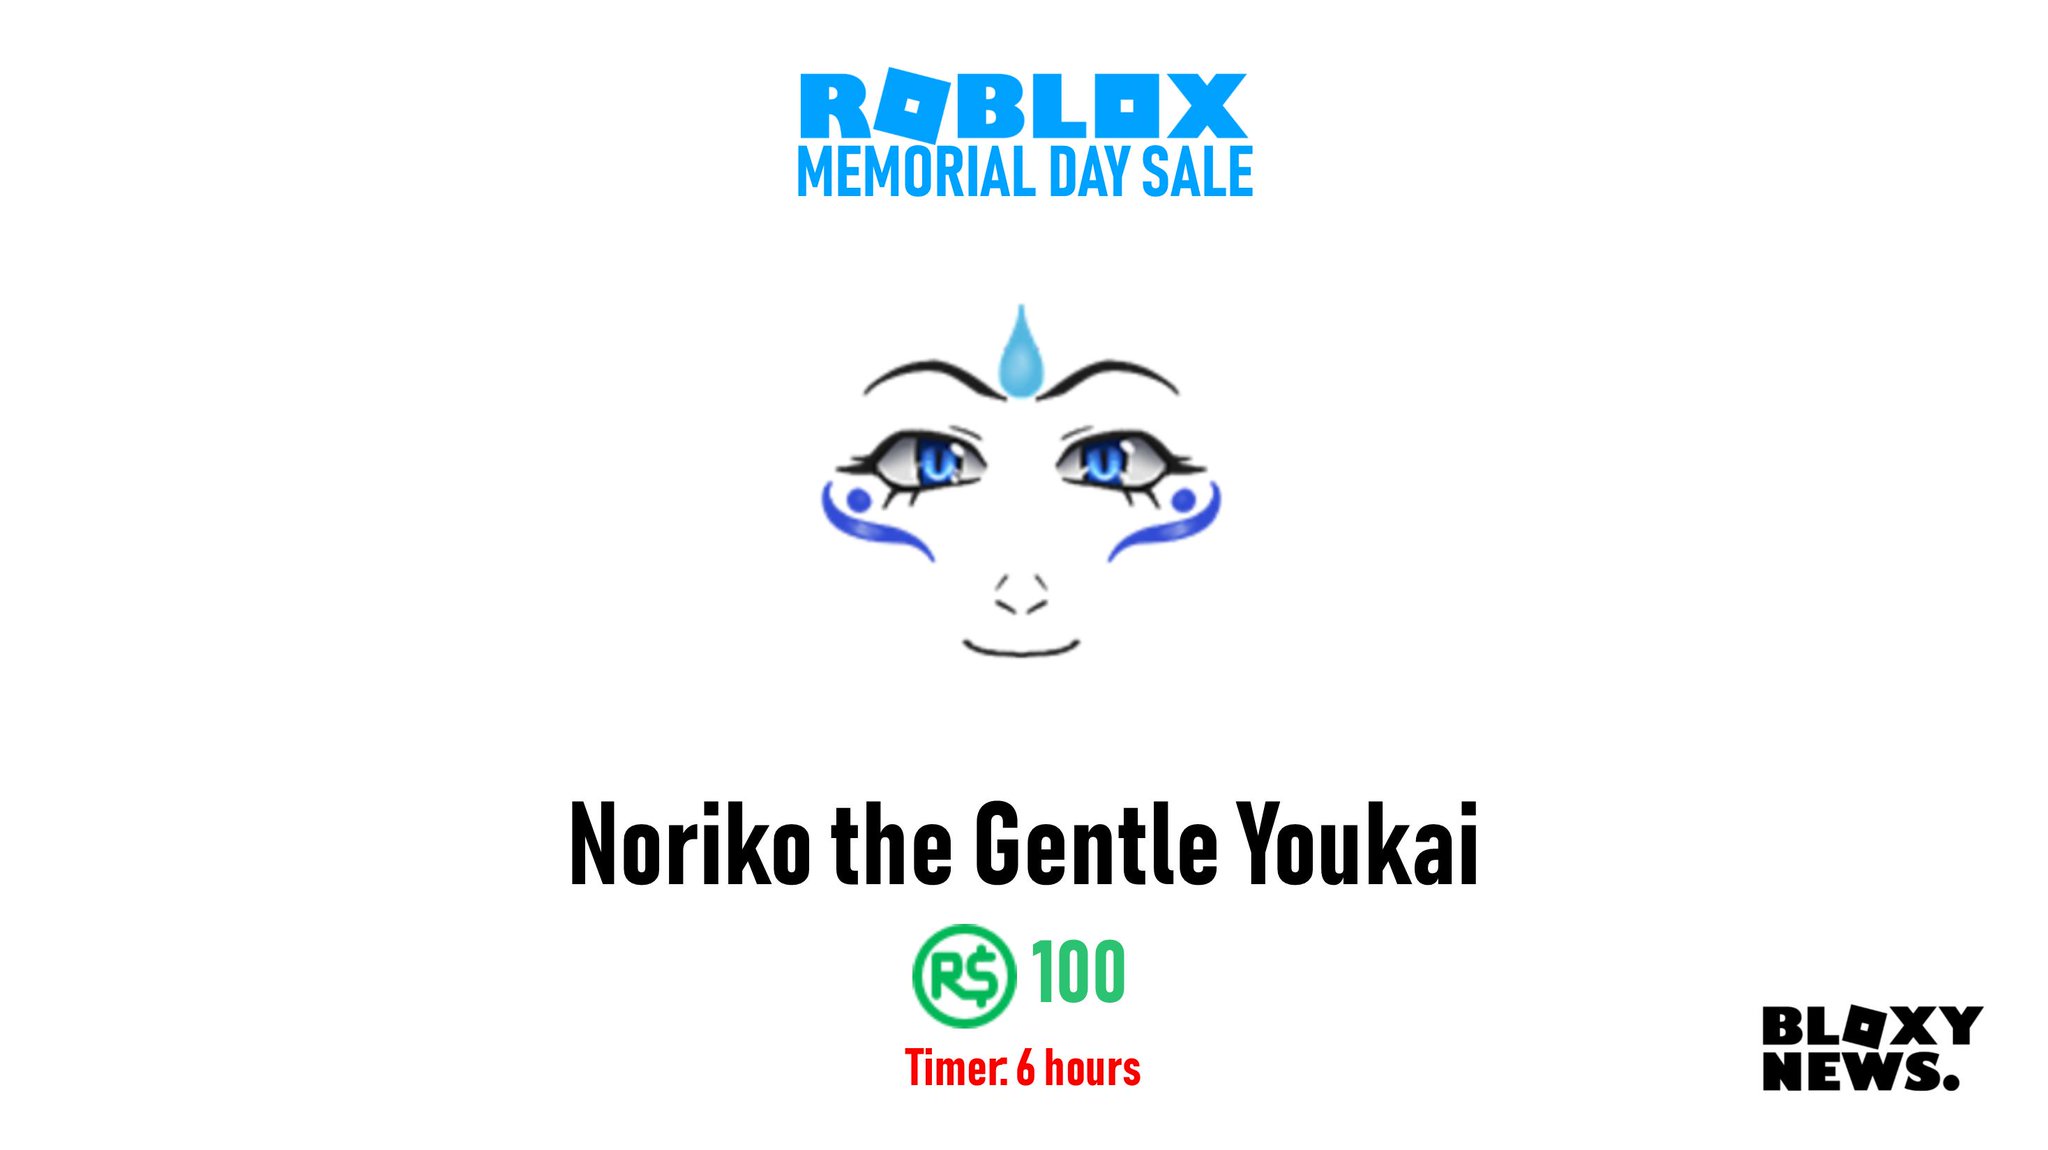 Bloxy News On Twitter Sometimes Things That Appear One Way Are Not As They Seem Roblox Memorialdaysale Noriko The Gentle Youkai Face Https T Co 5hjosbcrjb Timer 6 Hours Https T Co Hbl7elhhzz - noriko the gentle youkai face roblox